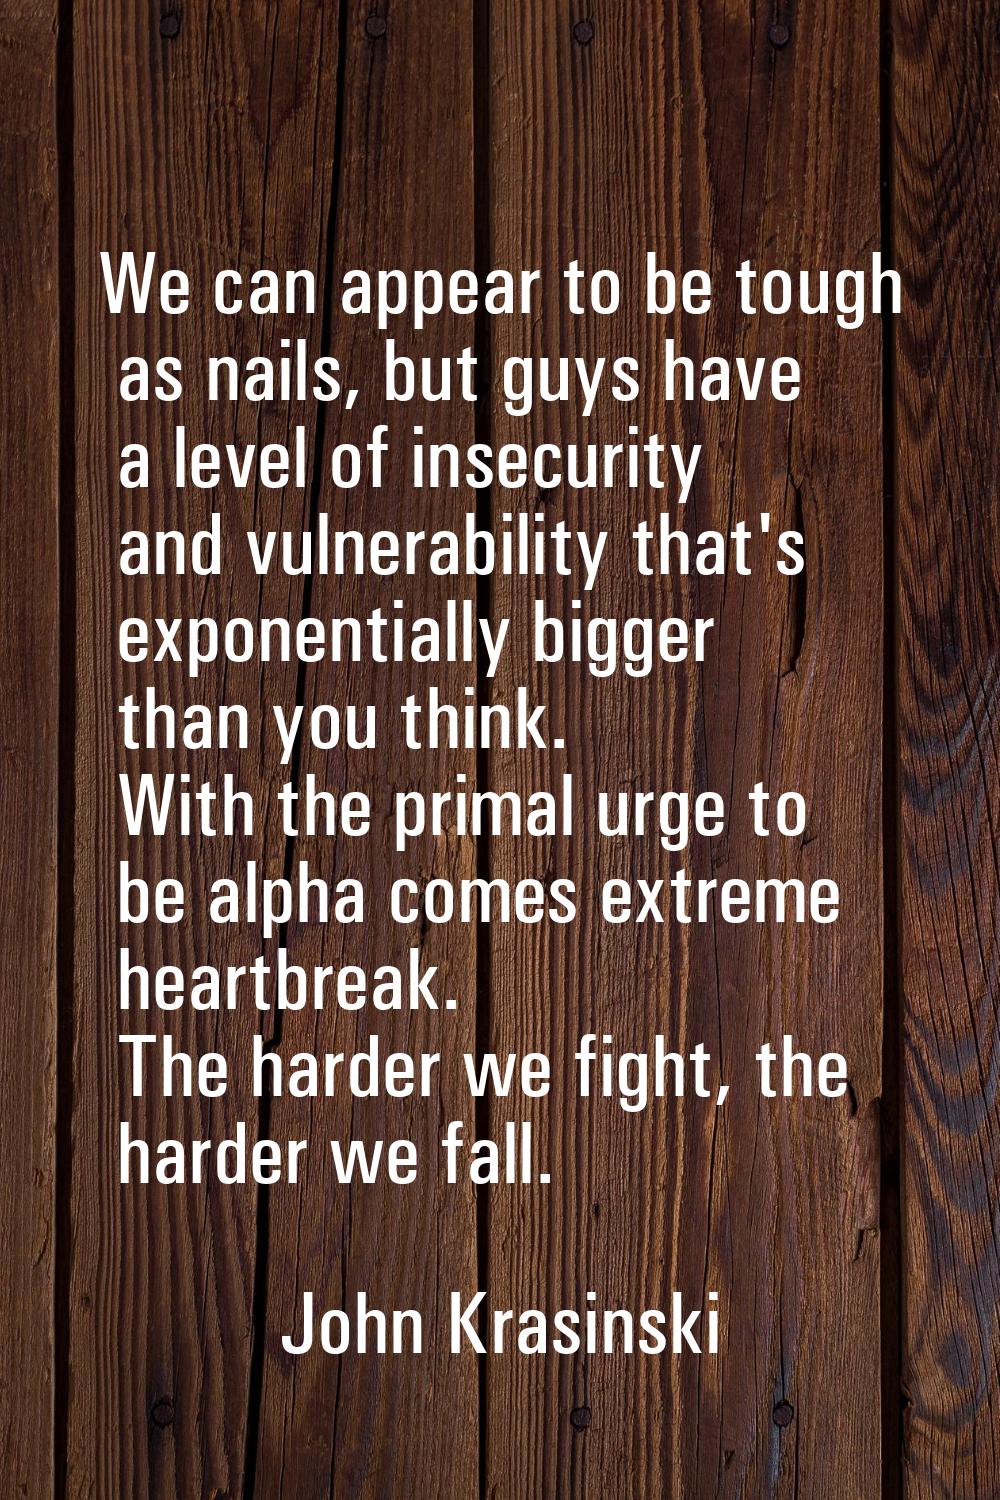 We can appear to be tough as nails, but guys have a level of insecurity and vulnerability that's ex